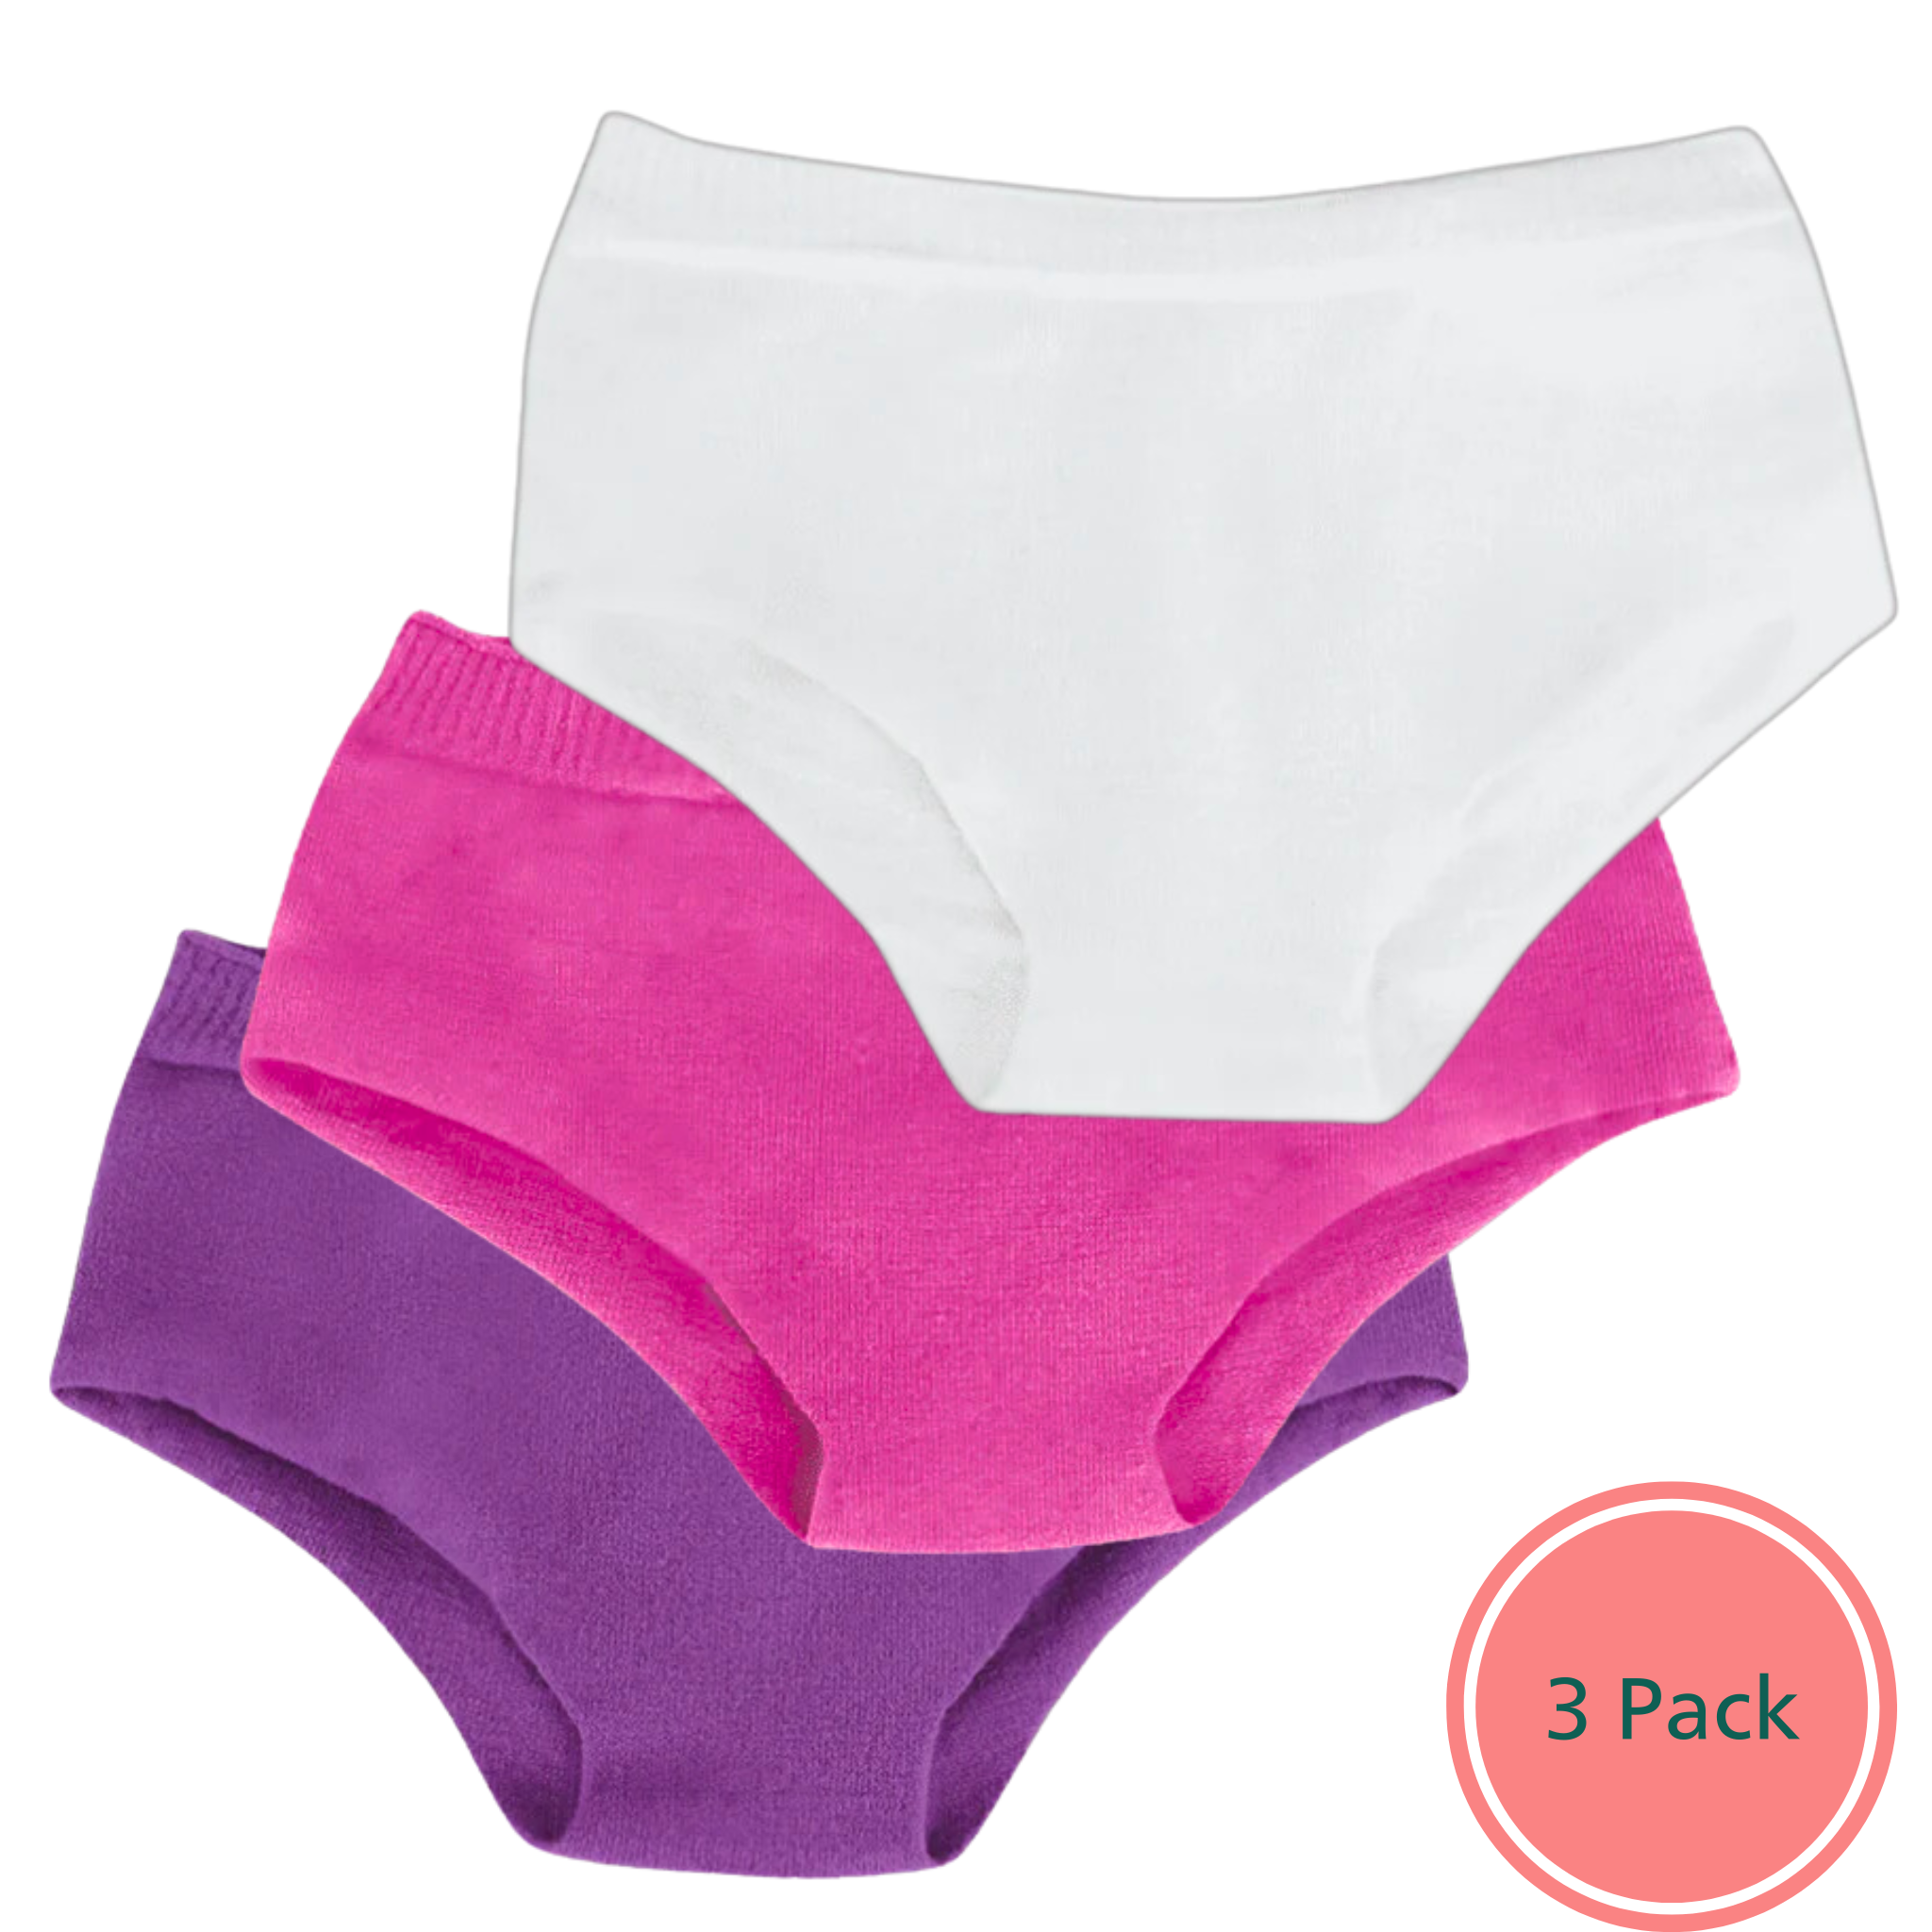 SmartKnitKIDS - Seamless Undies for Girls - Multipack Pink/Purple/White Brief Pants